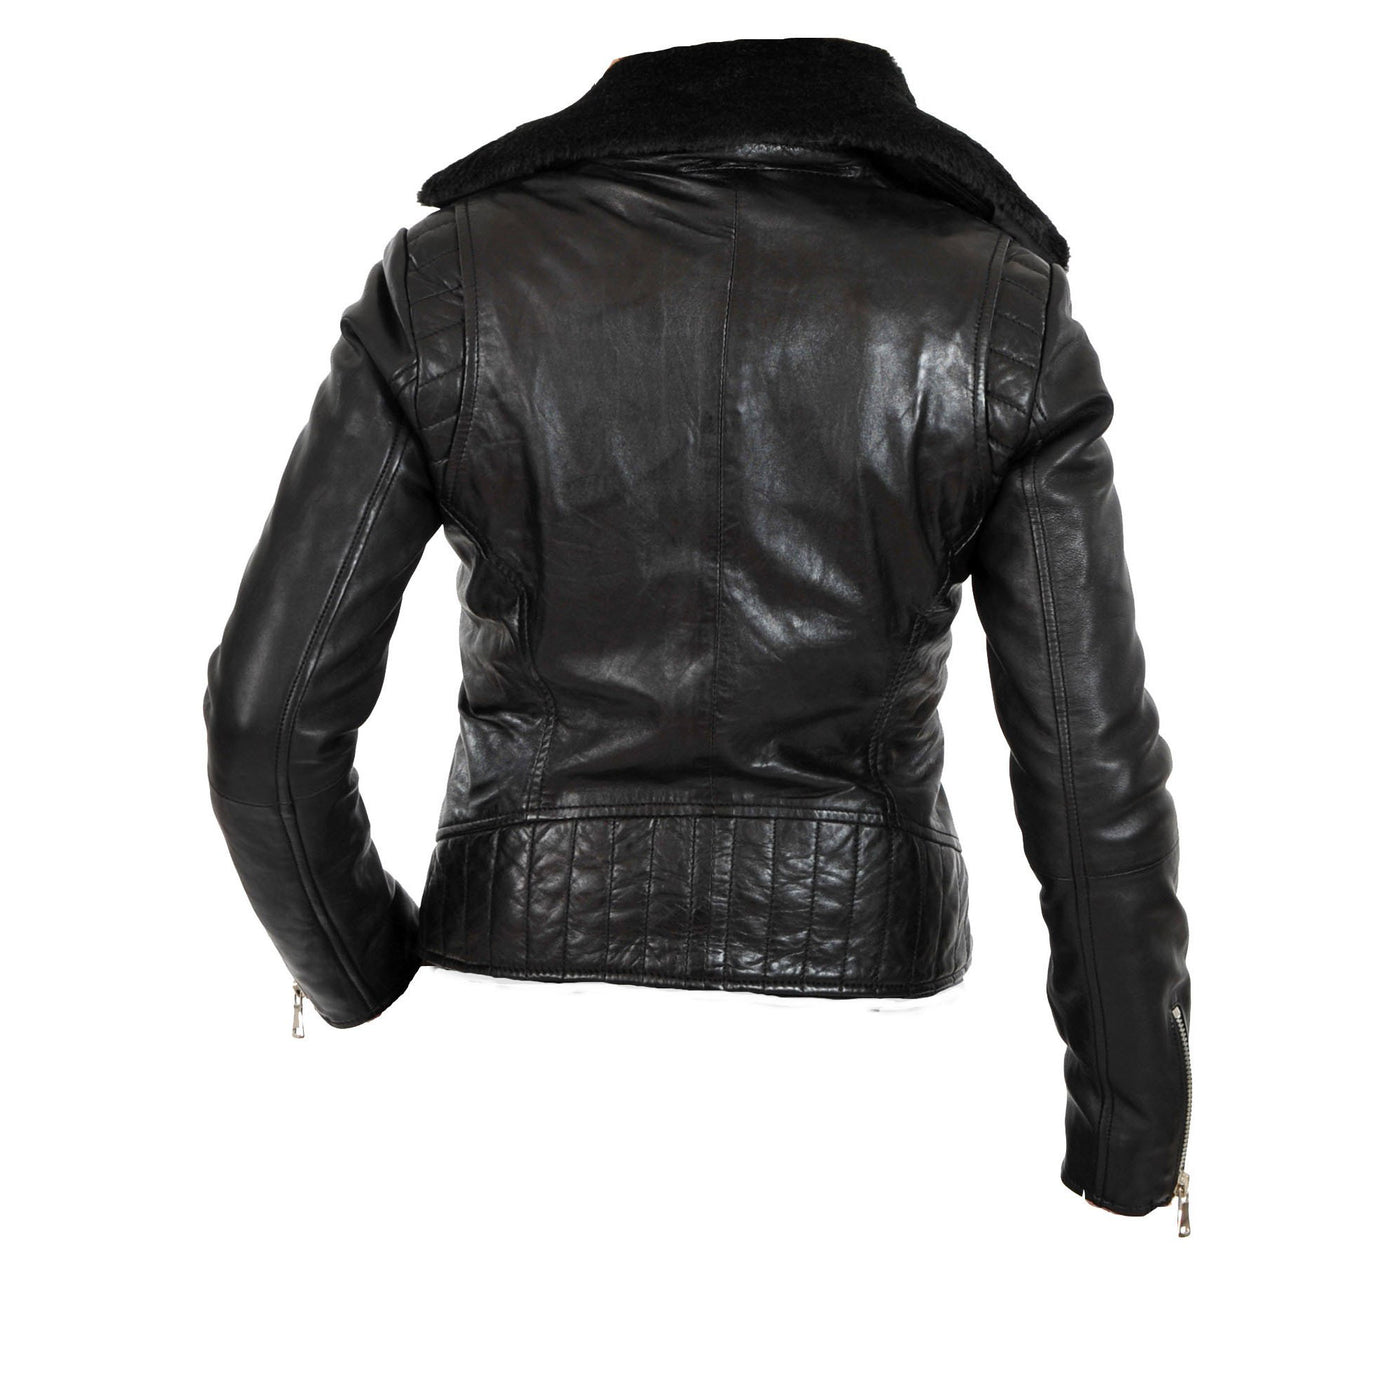 Women's biker style leather jacket with fur collars - Lusso Leather - 2